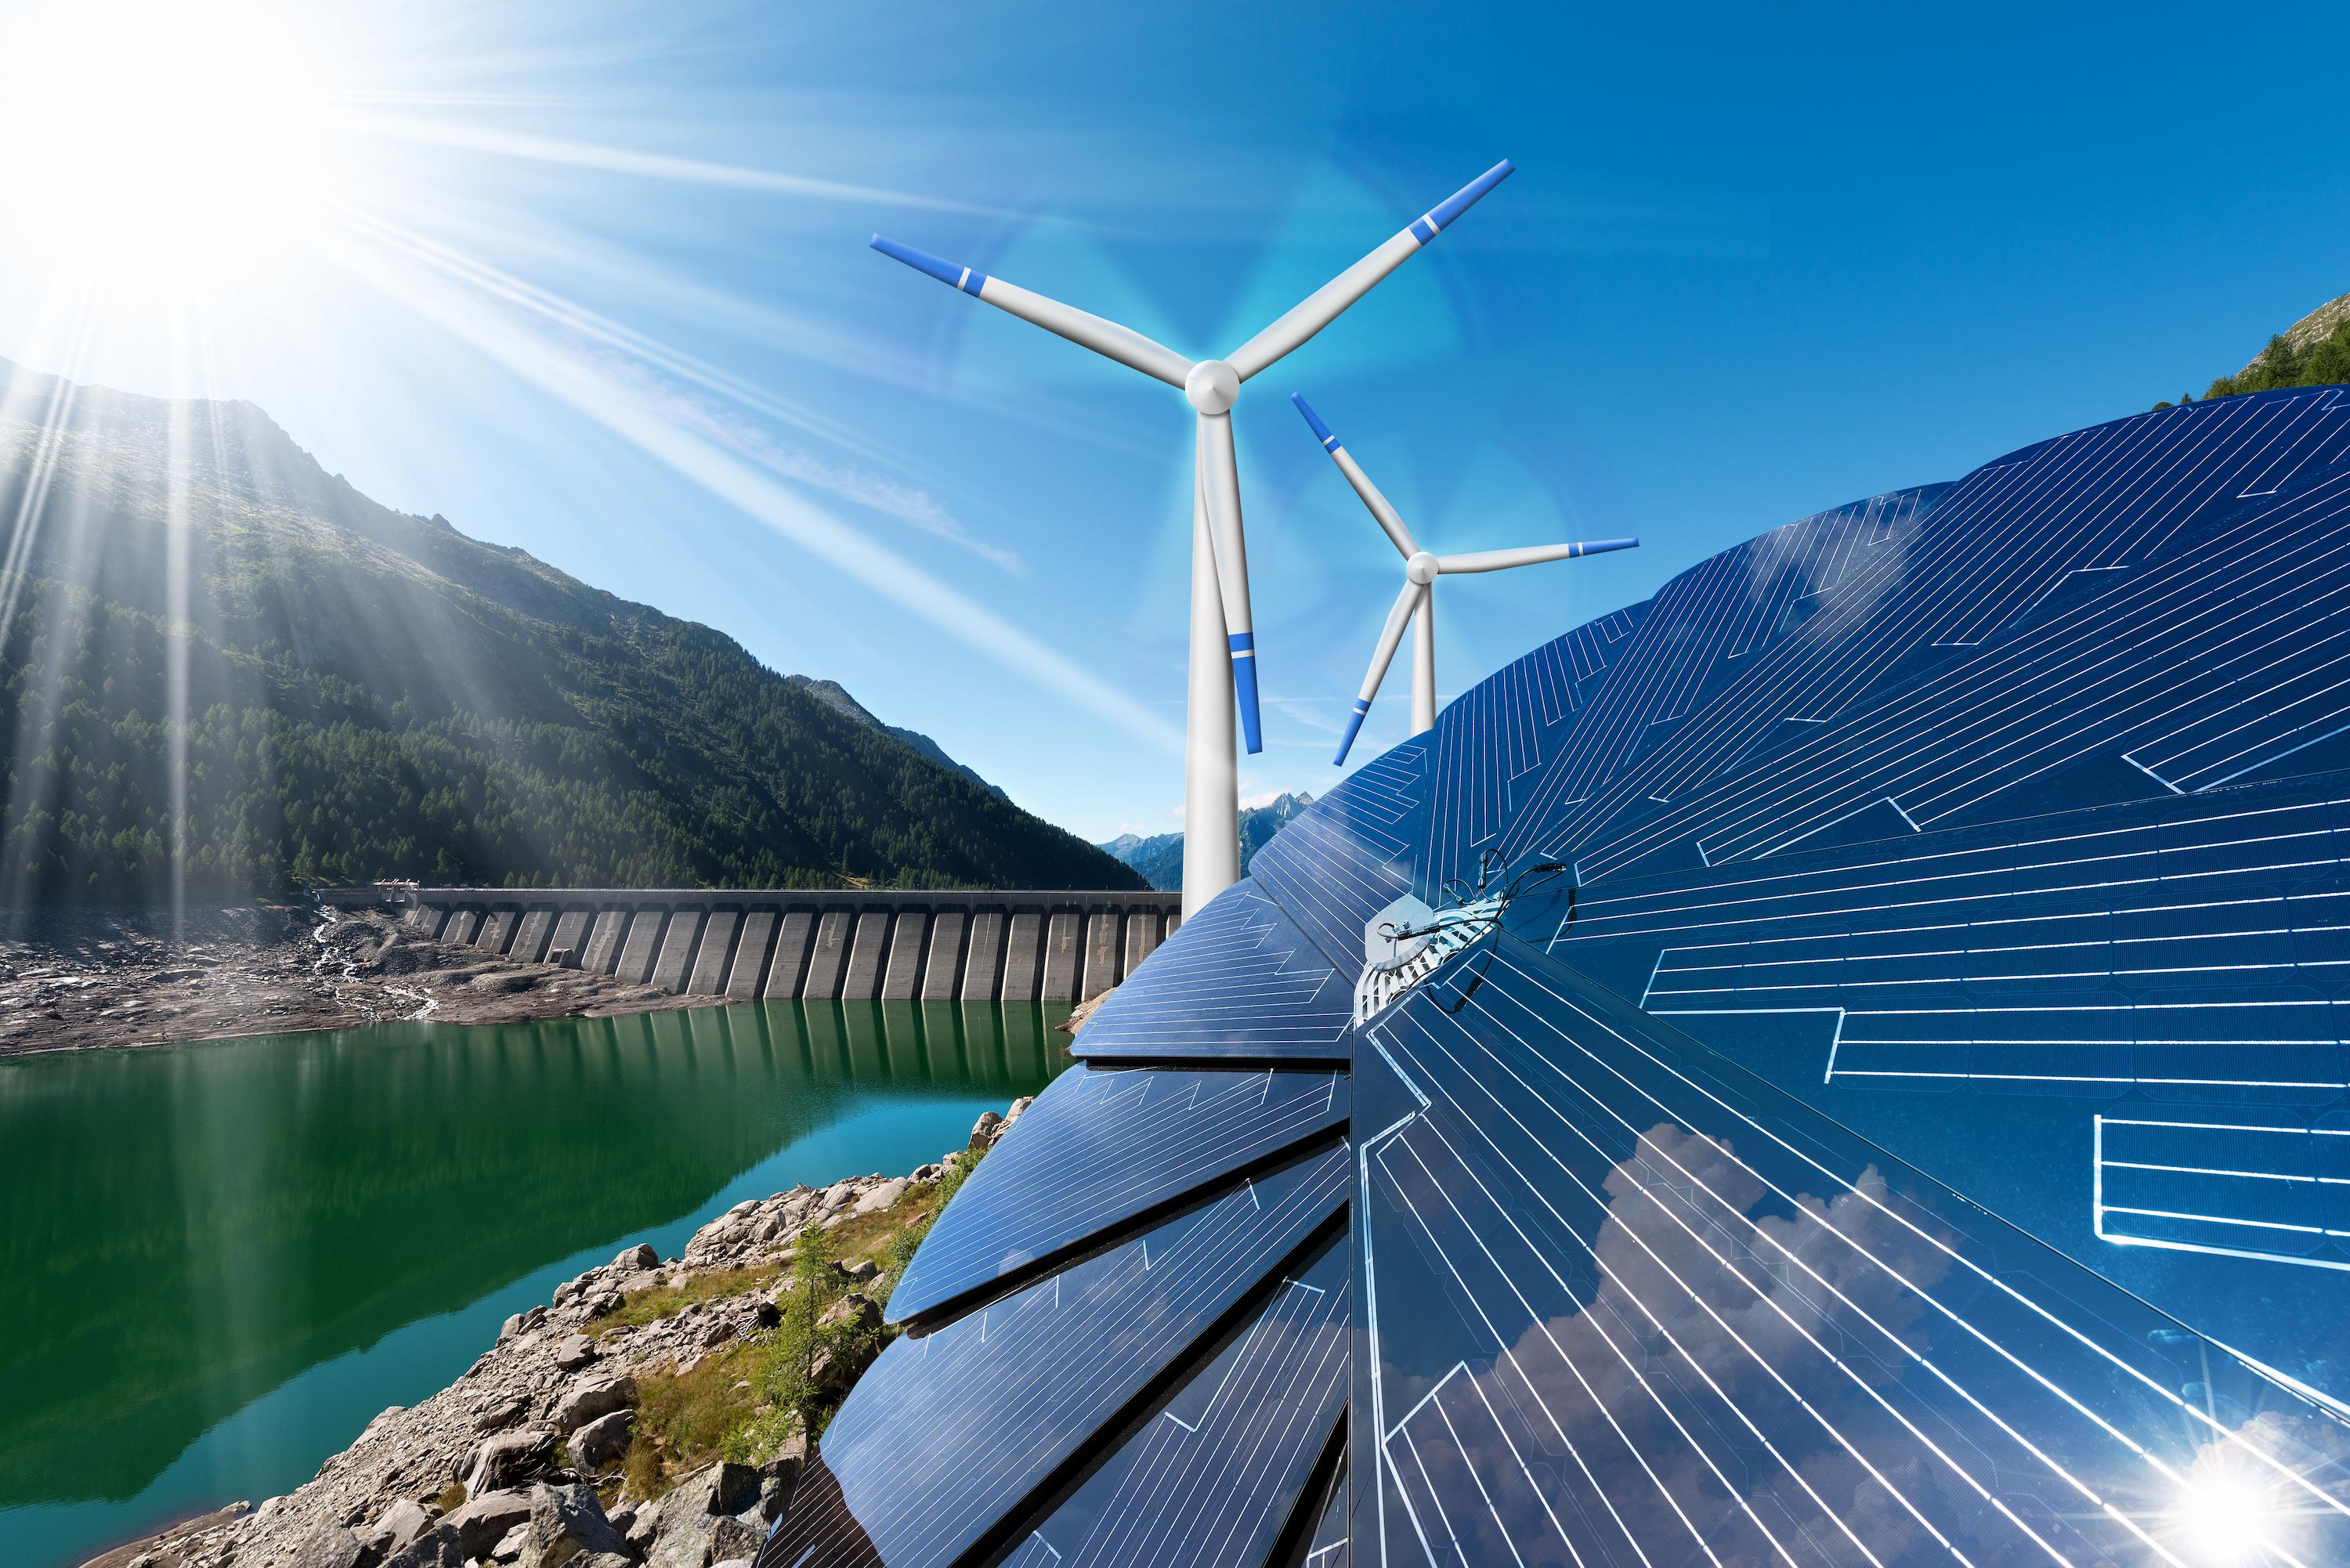 Windmills and solar panels surrounded by mountains and water by a dam